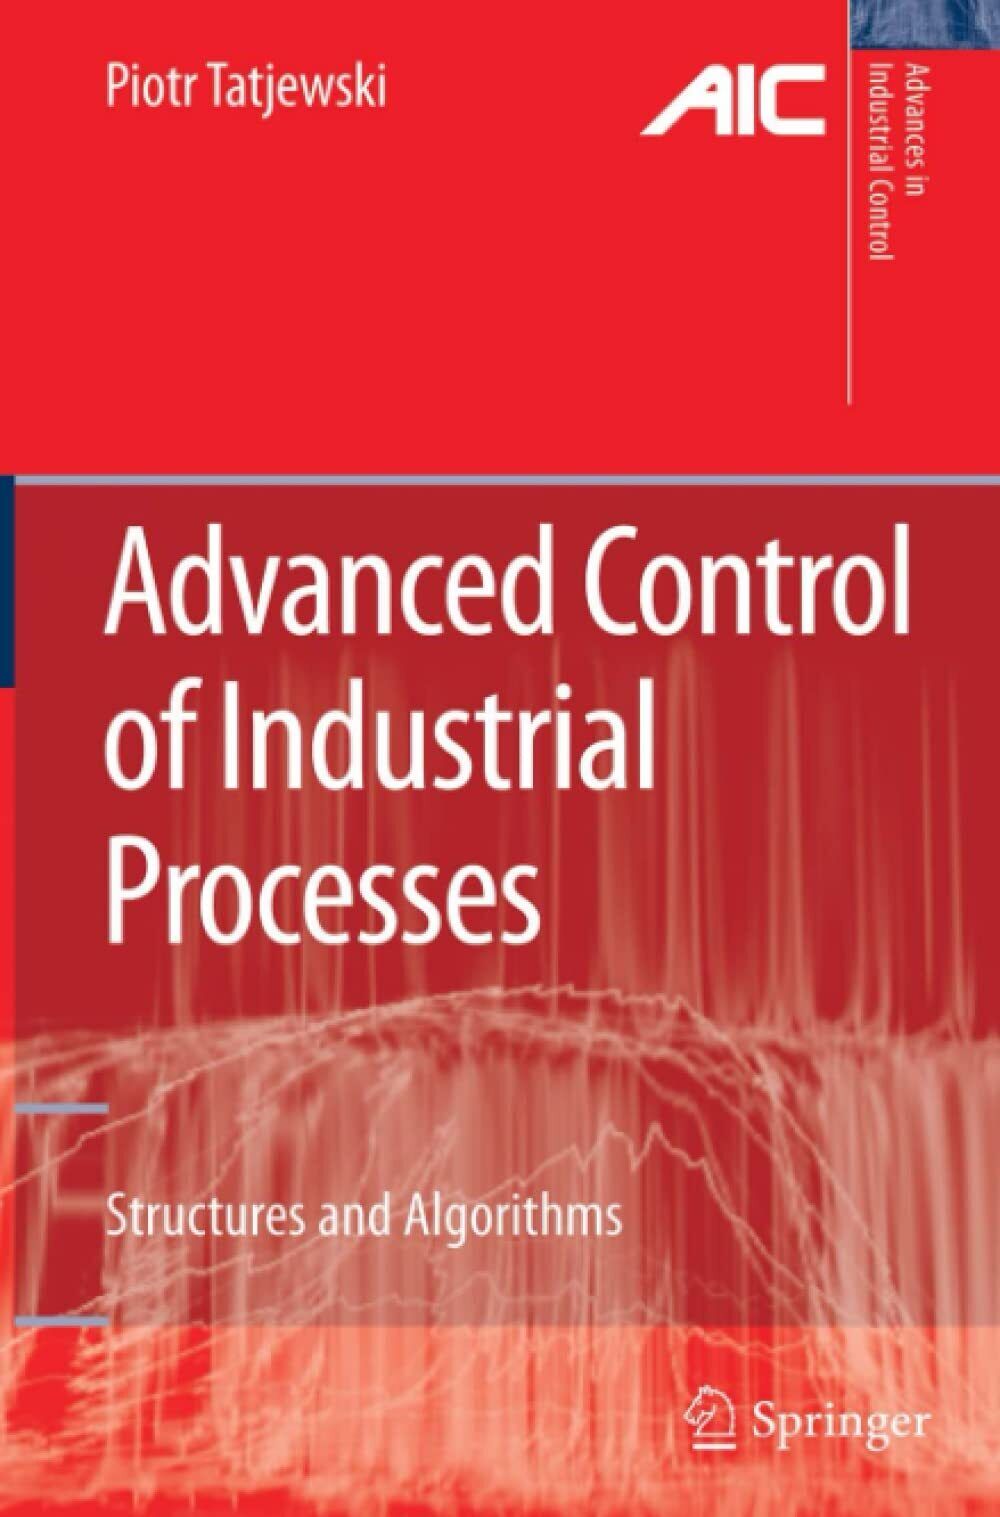 Advanced Control of Industrial Processes: Structures and Algorithms - 2010 libro usato